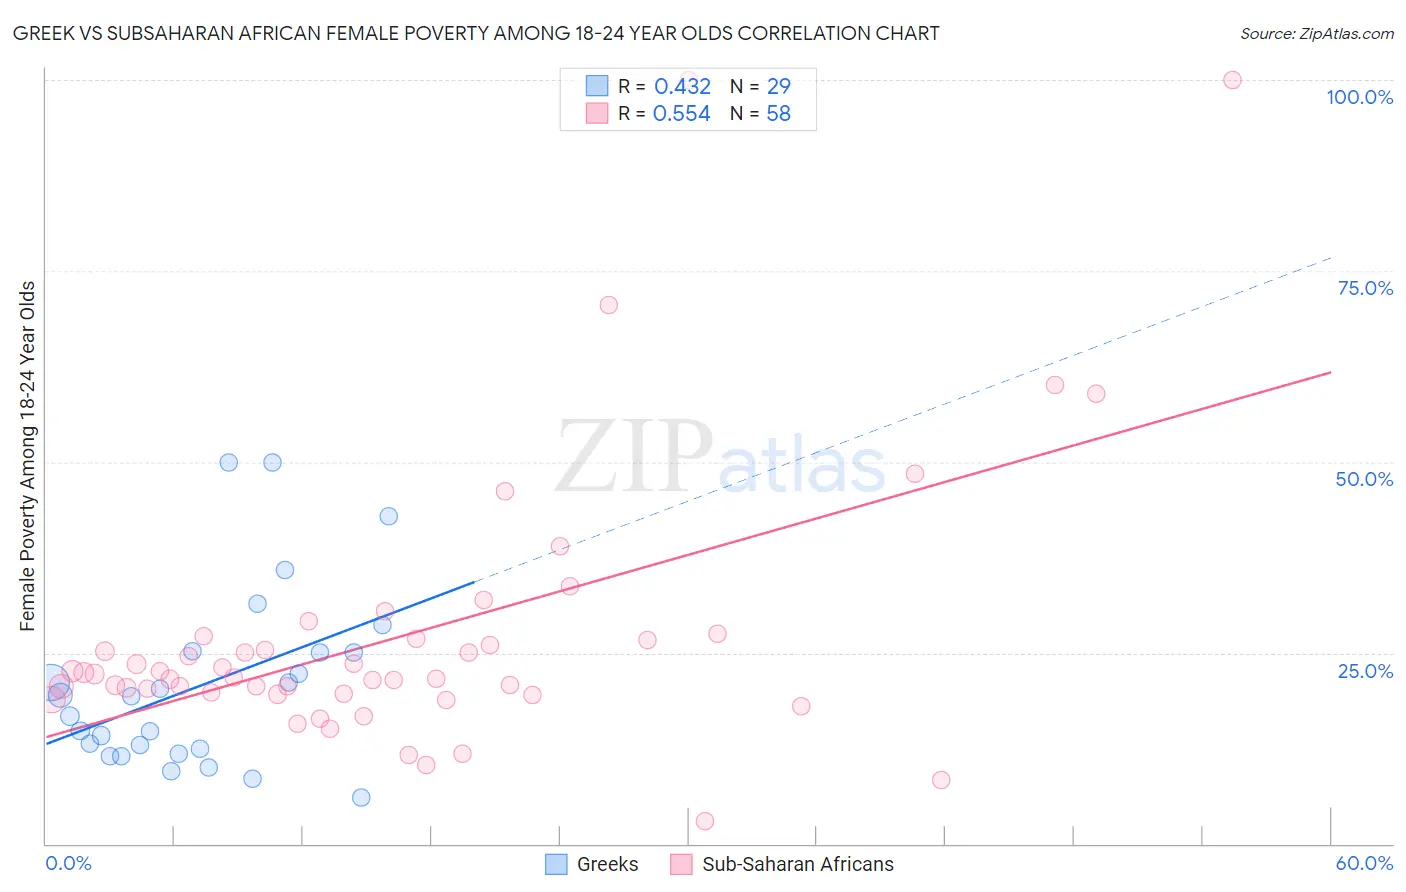 Greek vs Subsaharan African Female Poverty Among 18-24 Year Olds